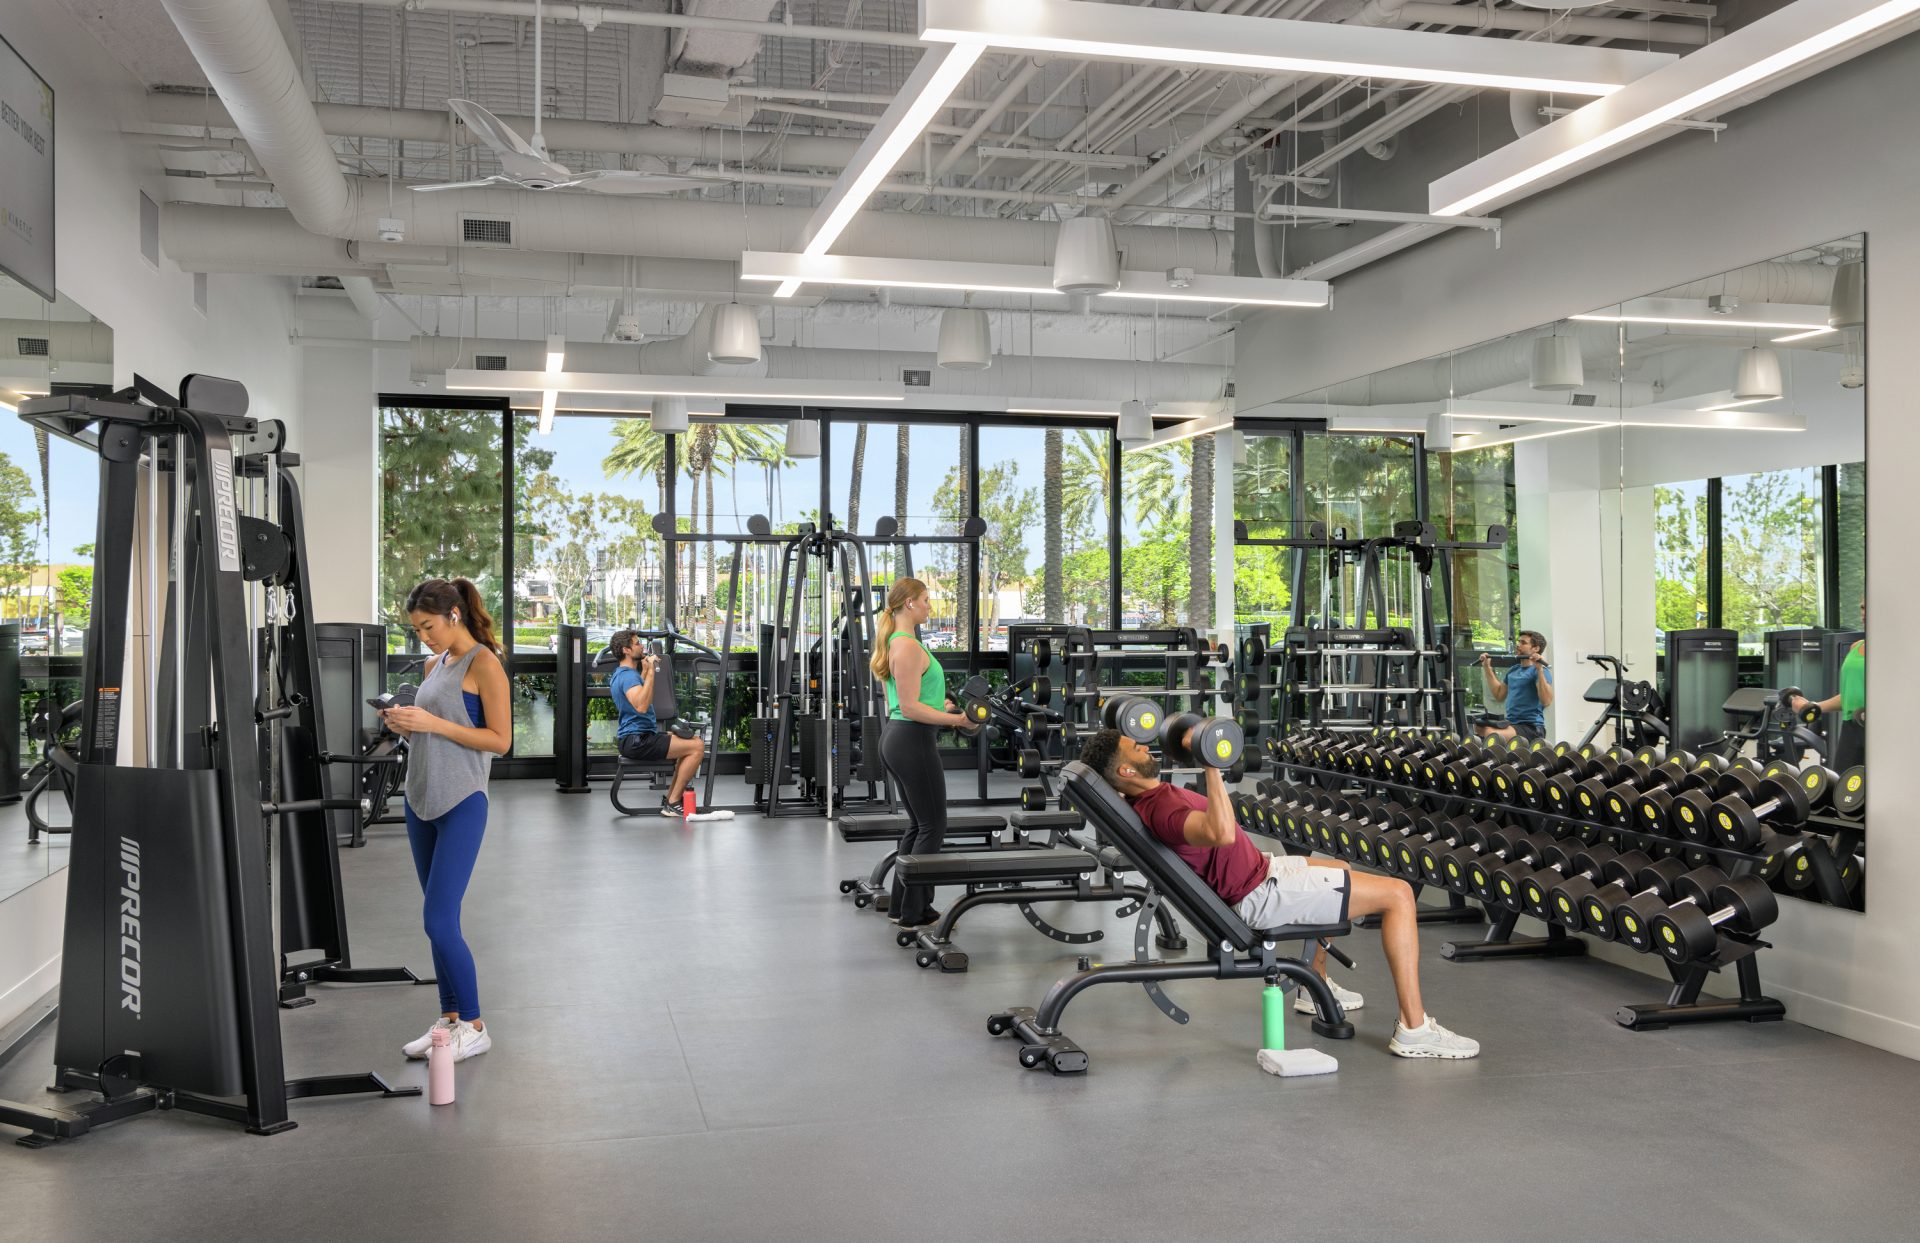 Interior lifestyle photography of Kinetic Fitness Center at 675 Anton Blvd at Pacific Arts Plaza, Irvine, Ca